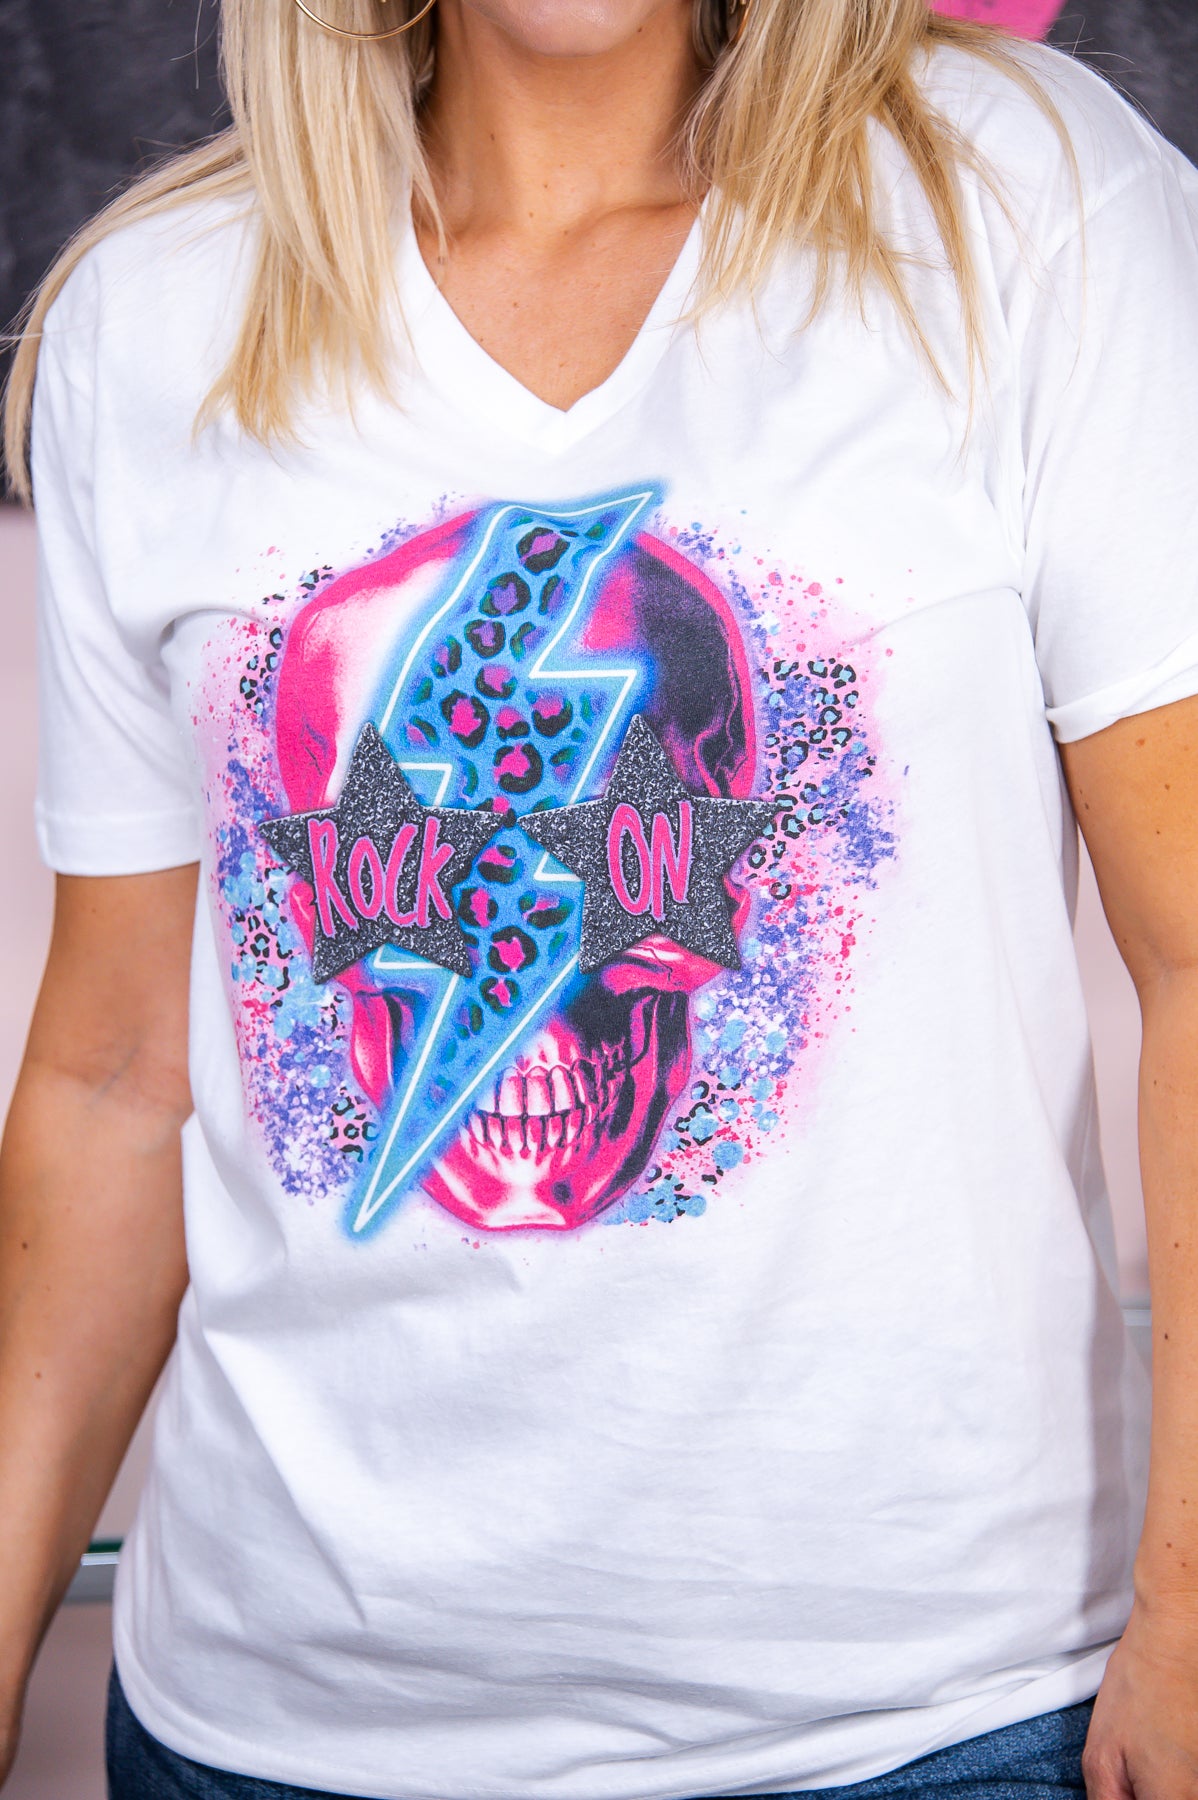 Rock On Skull White Graphic Tee - A2860WH